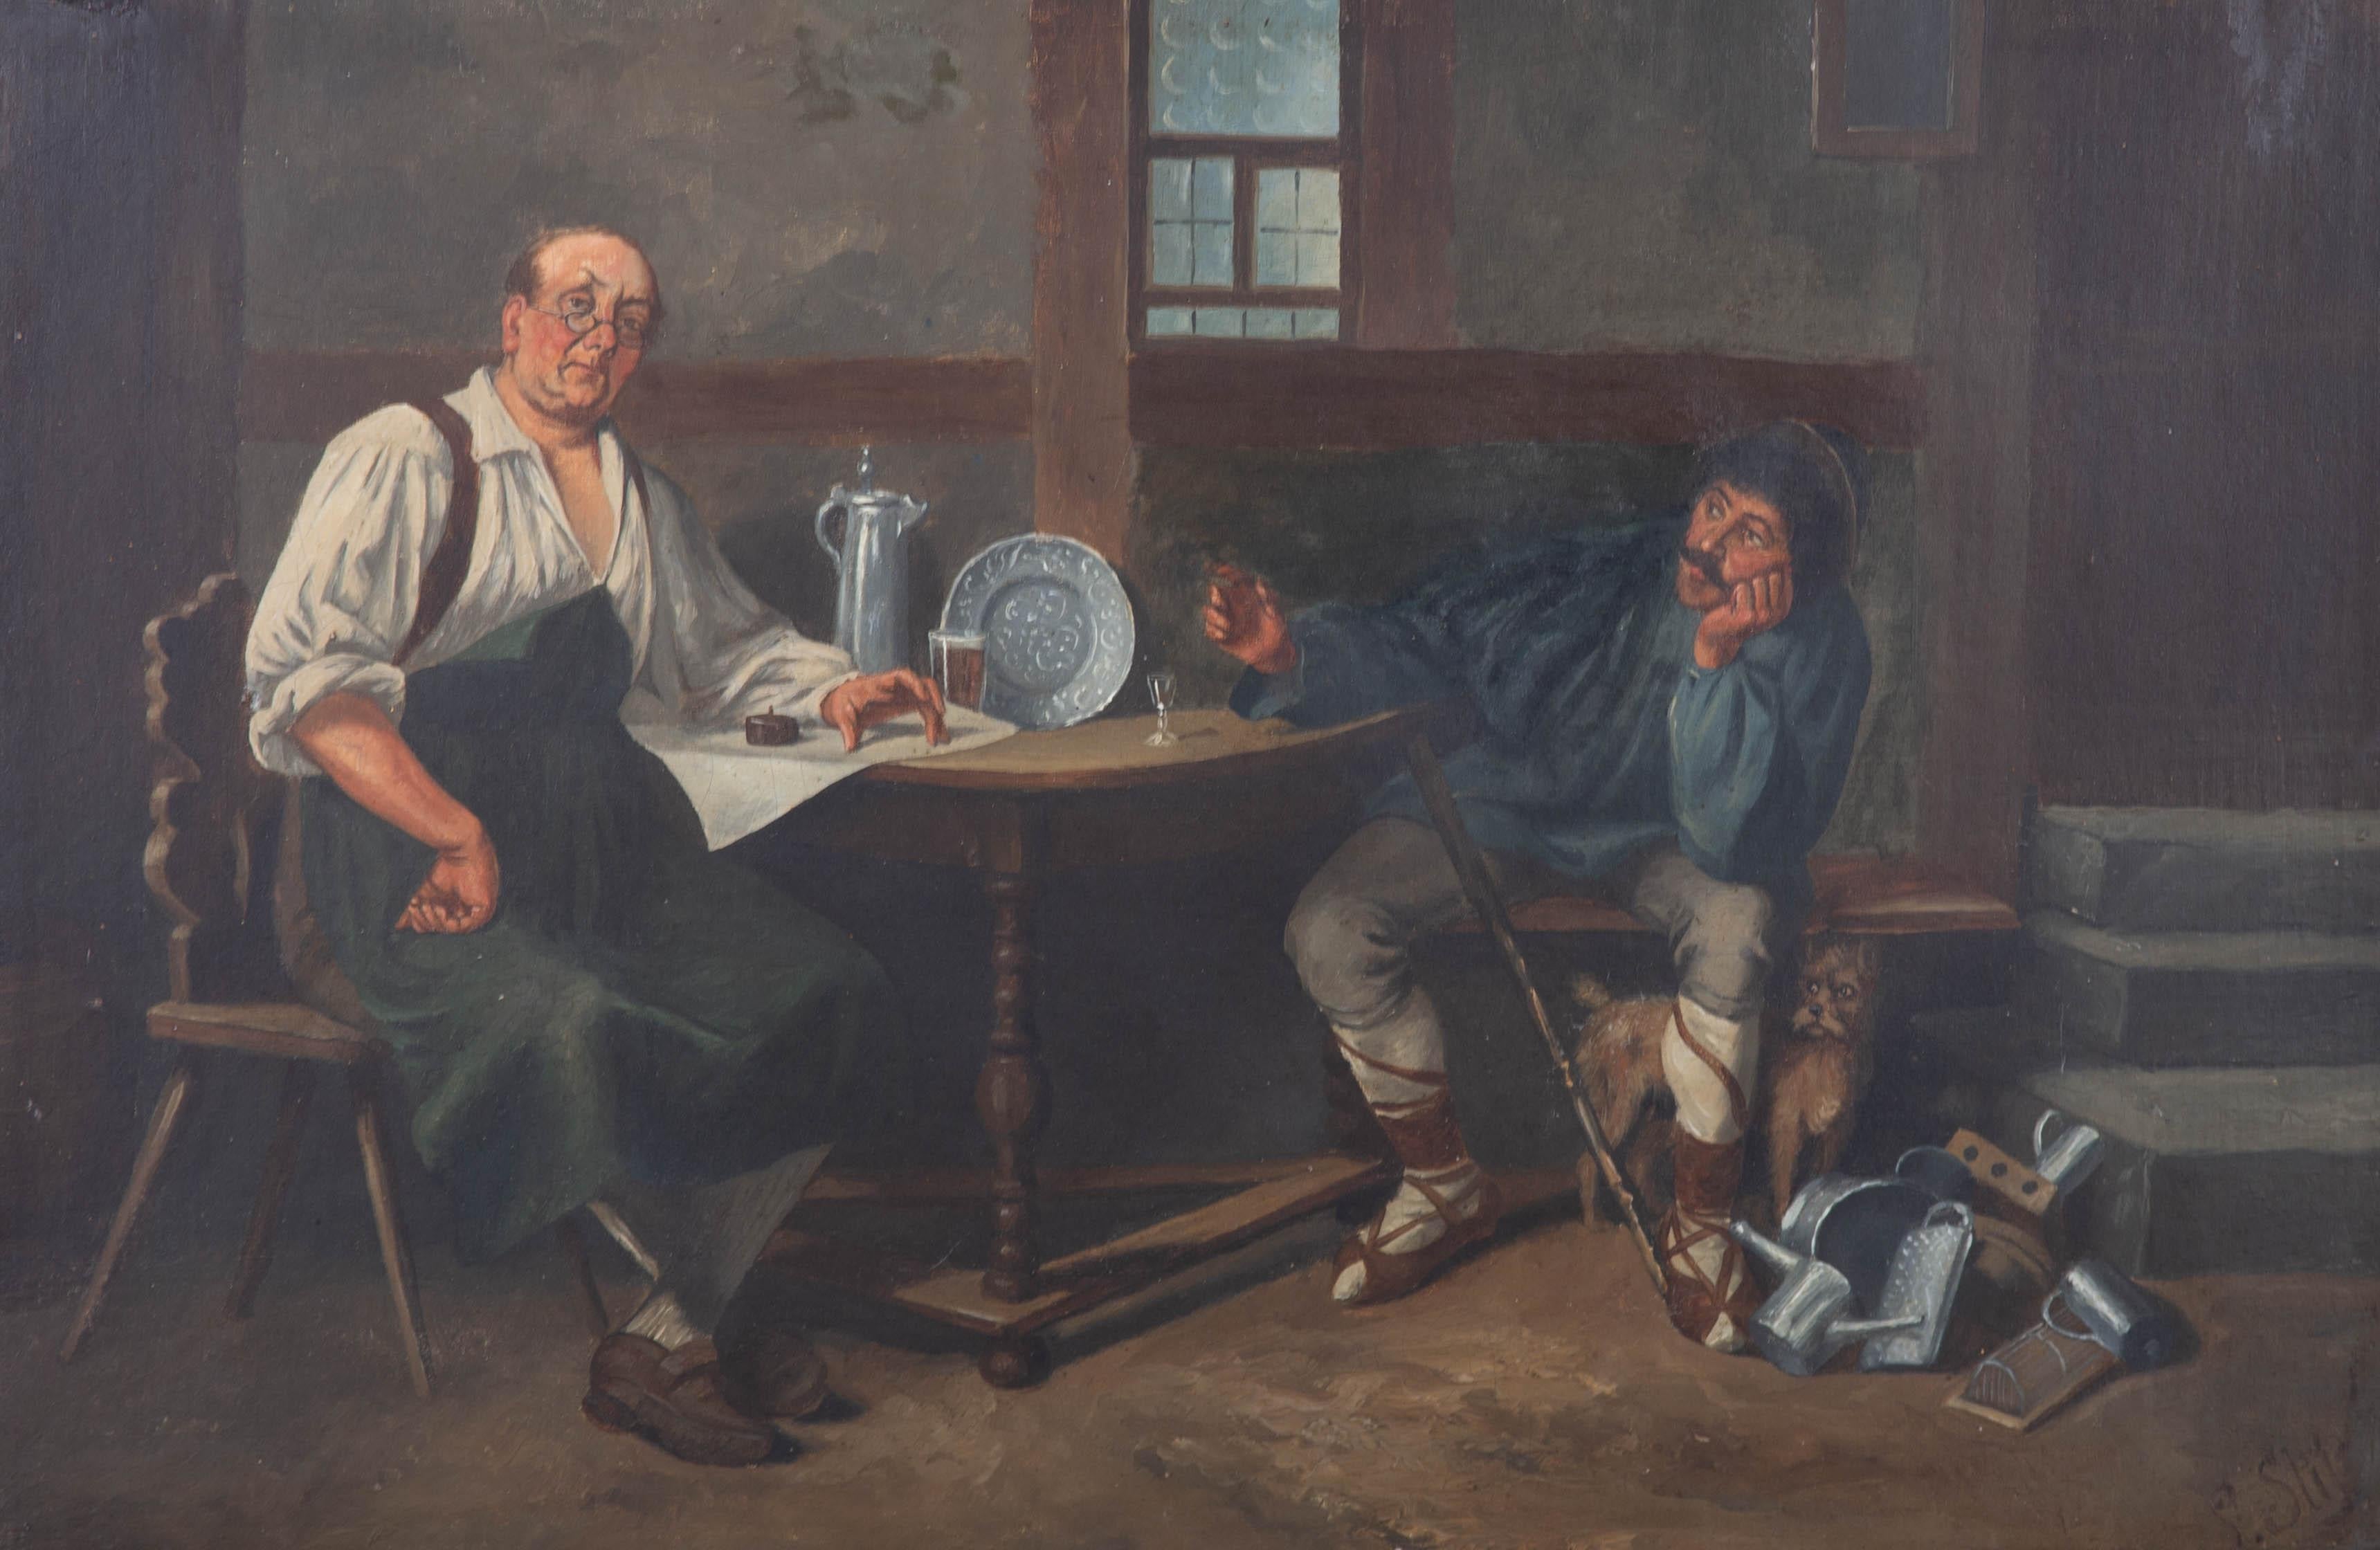 An interior scene in an inn with a man peddling his pewter and silverware to the innkeeper. The latter figure engages the viewer in eye contact with a sceptical expression while a suspicious terrier watches on nearby. Presented in a wooden frame.